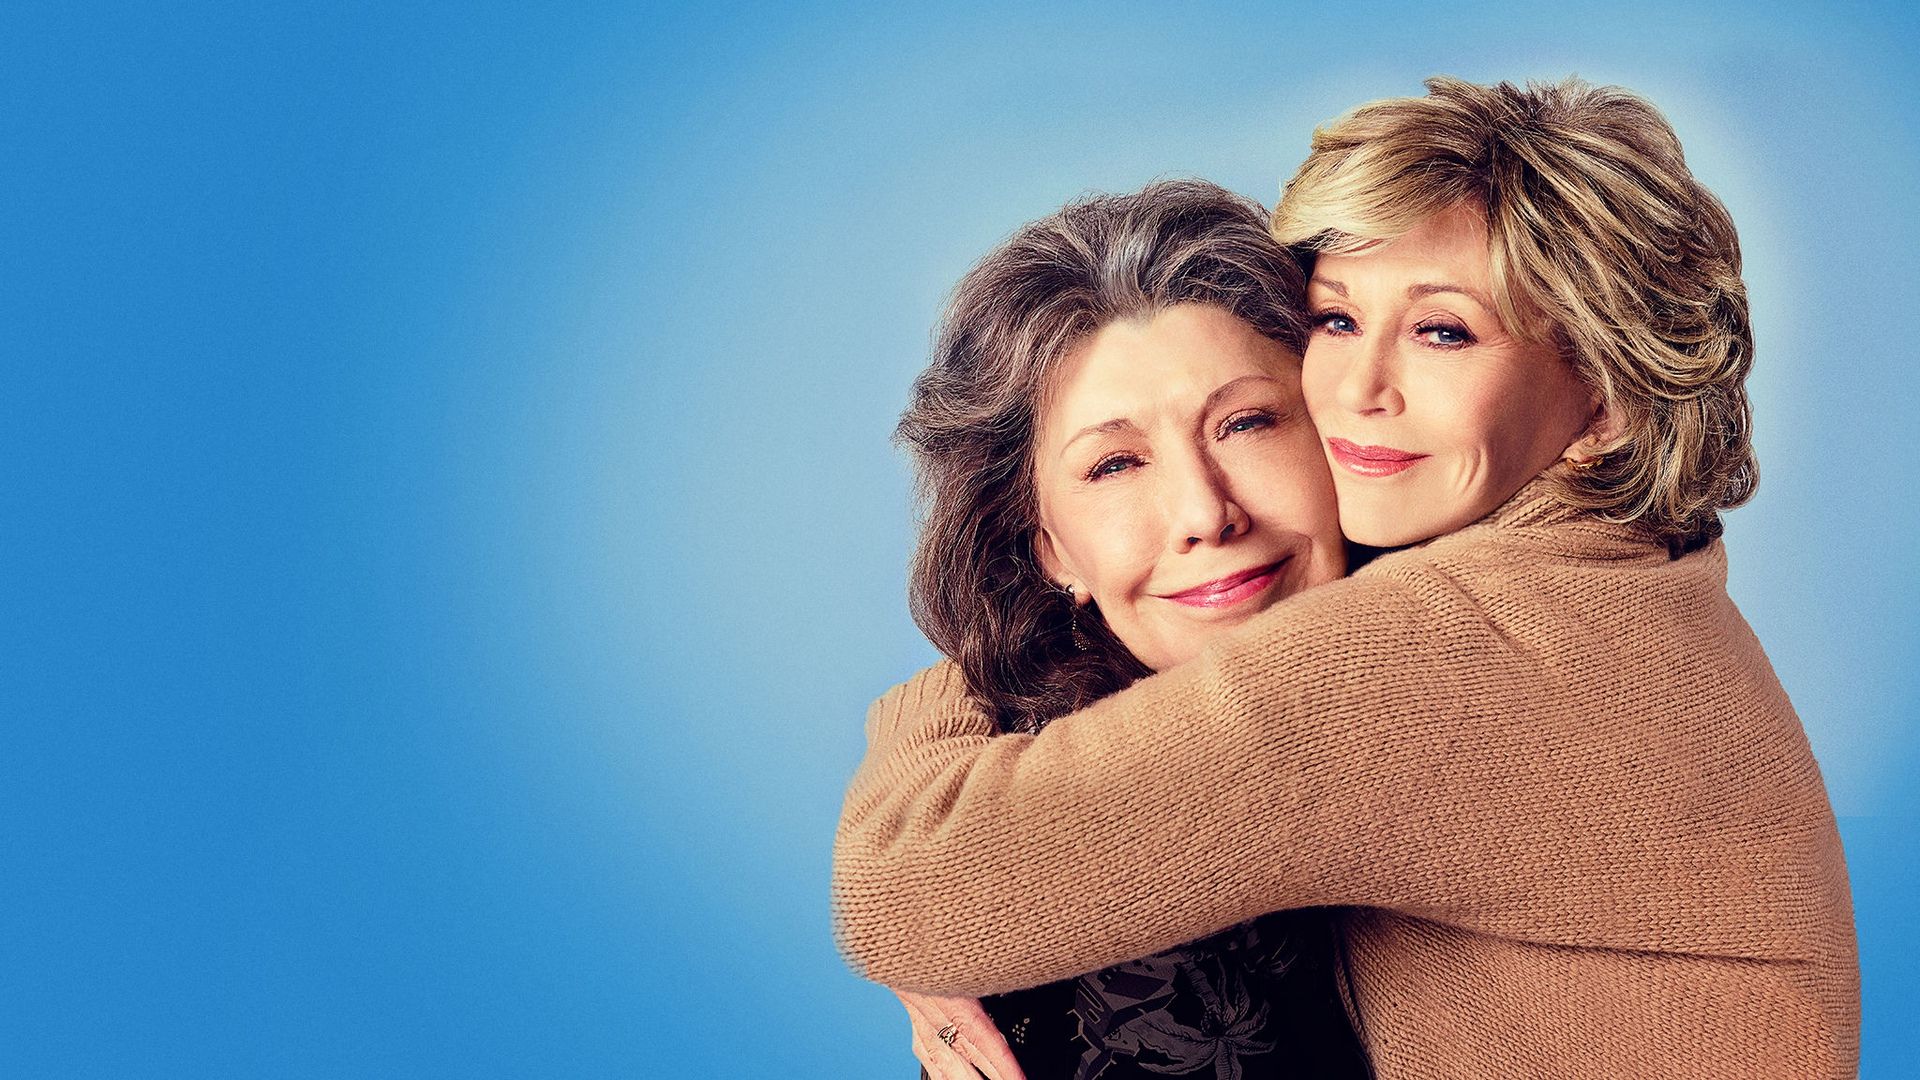 Grace and Frankie background